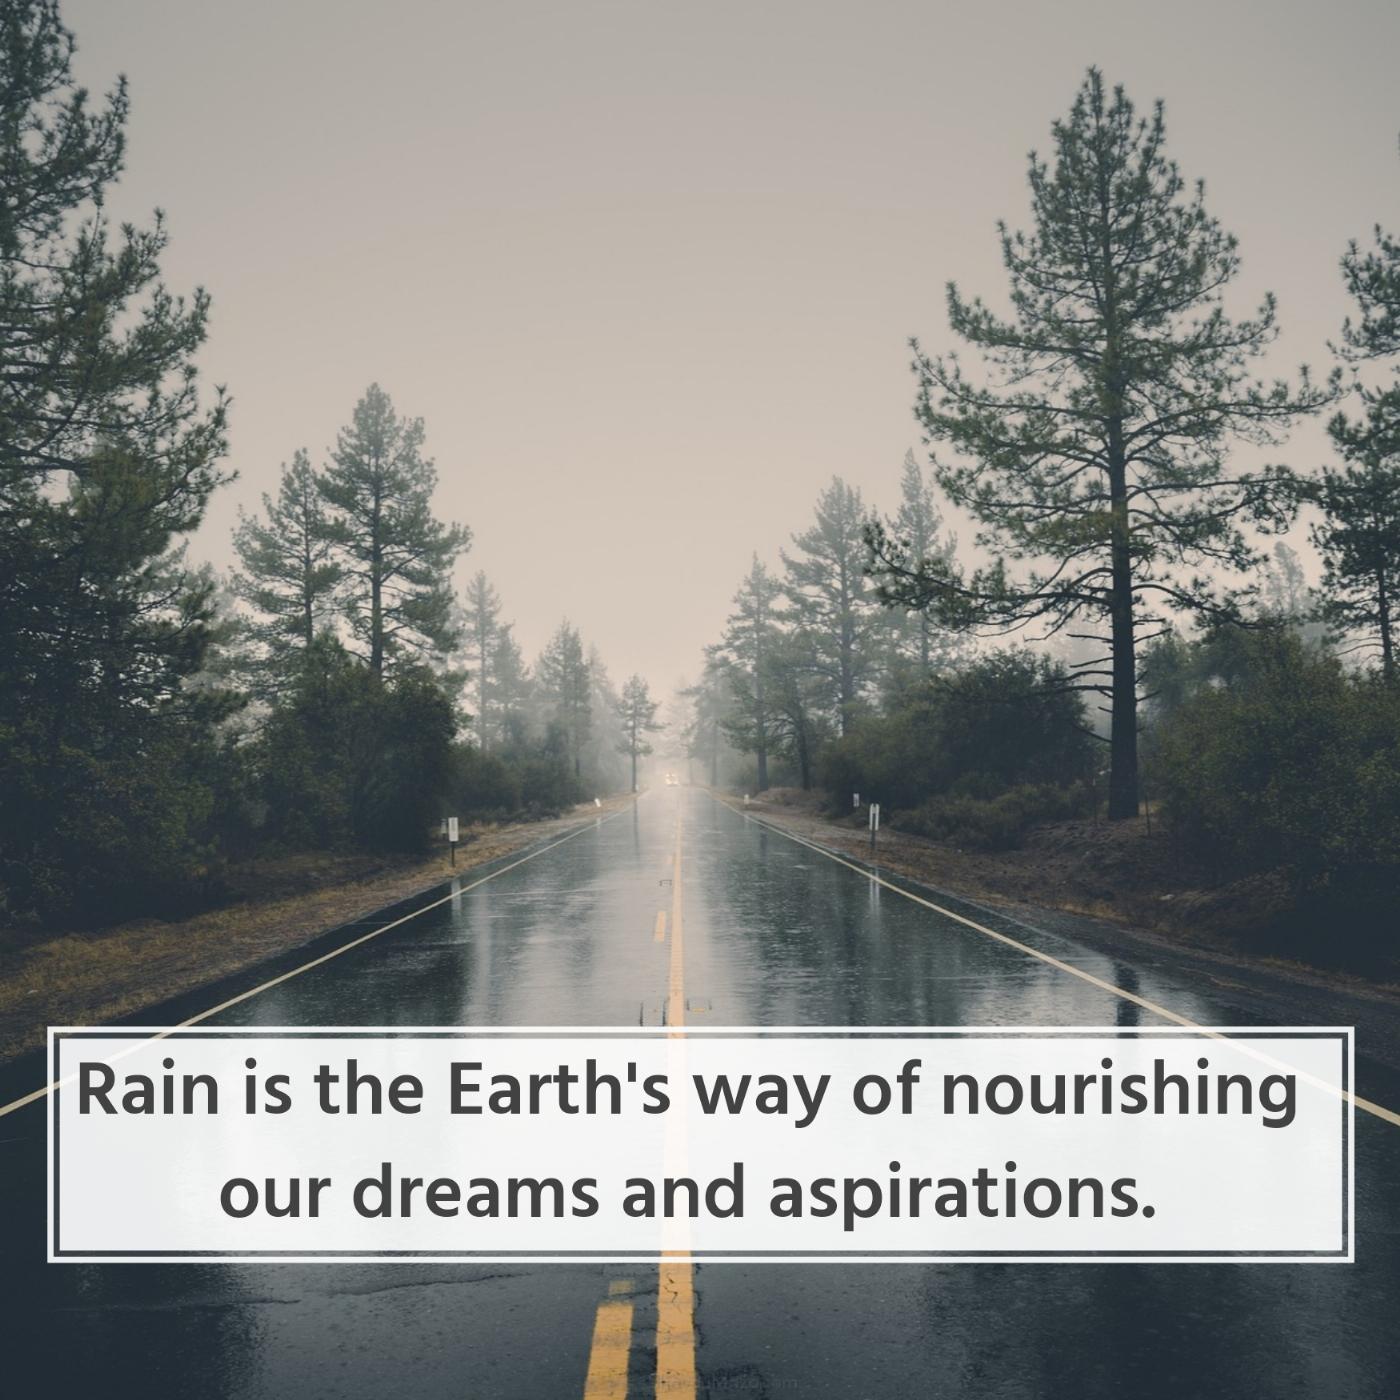 Rain is the Earth's way of nourishing our dreams and aspirations